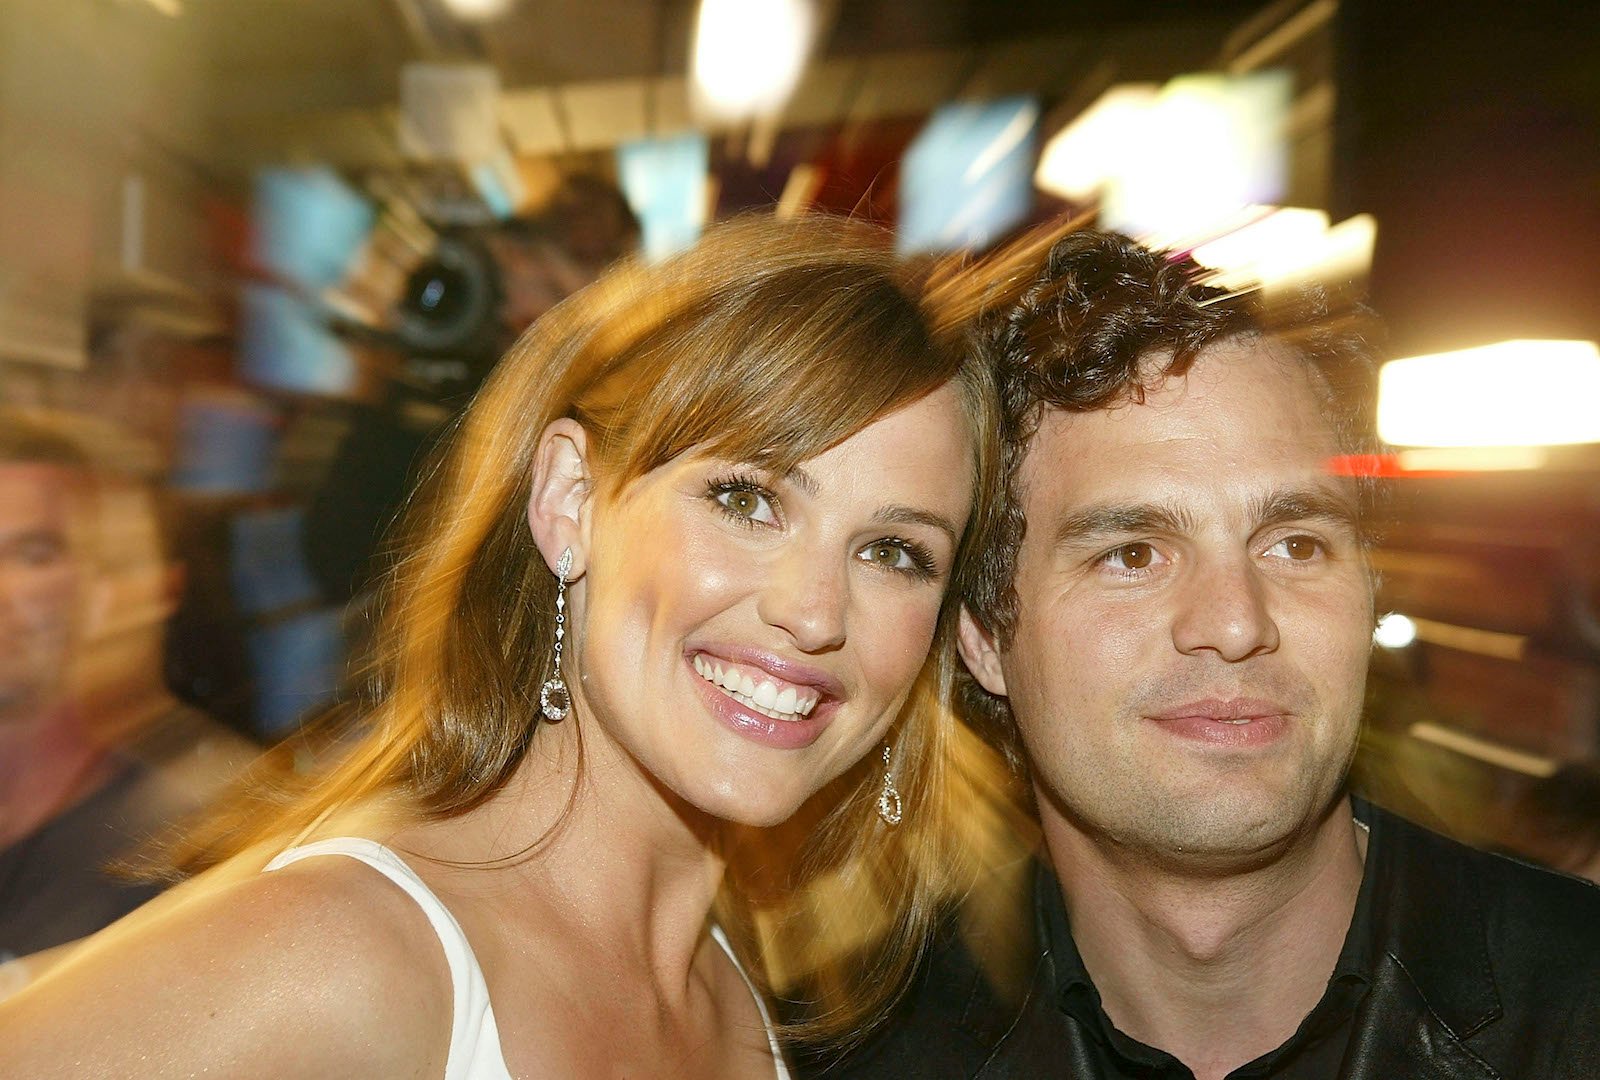 Jennifer Garner and Mark Ruffalo Celebrate 'The Adam Project' With '13 Going on 30' Razzles